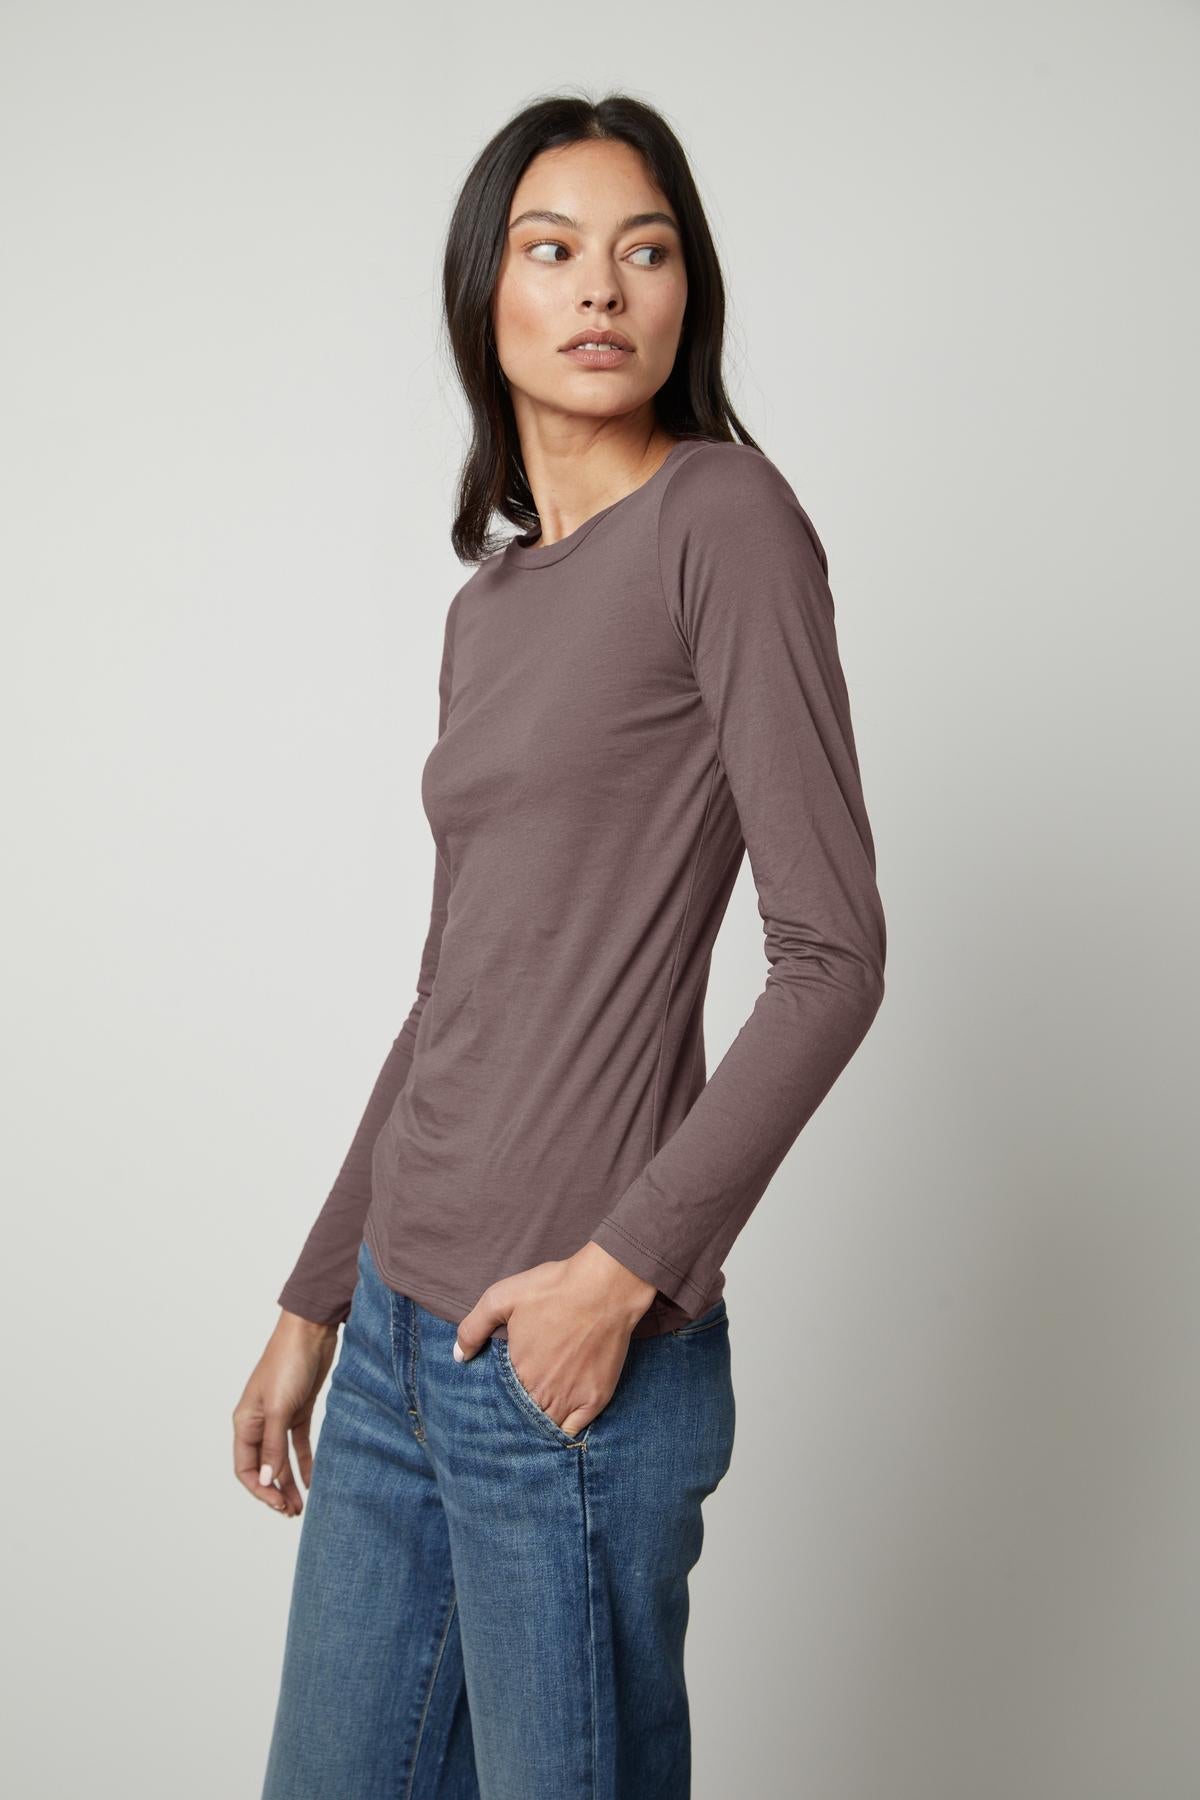 The Velvet by Graham & Spencer ZOFINA GAUZY WHISPER FITTED CREW NECK TEE in dark brown is perfect for any occasion with its universally flattering cut and soft, gauzy whisper cotton fabric.-36594705268929